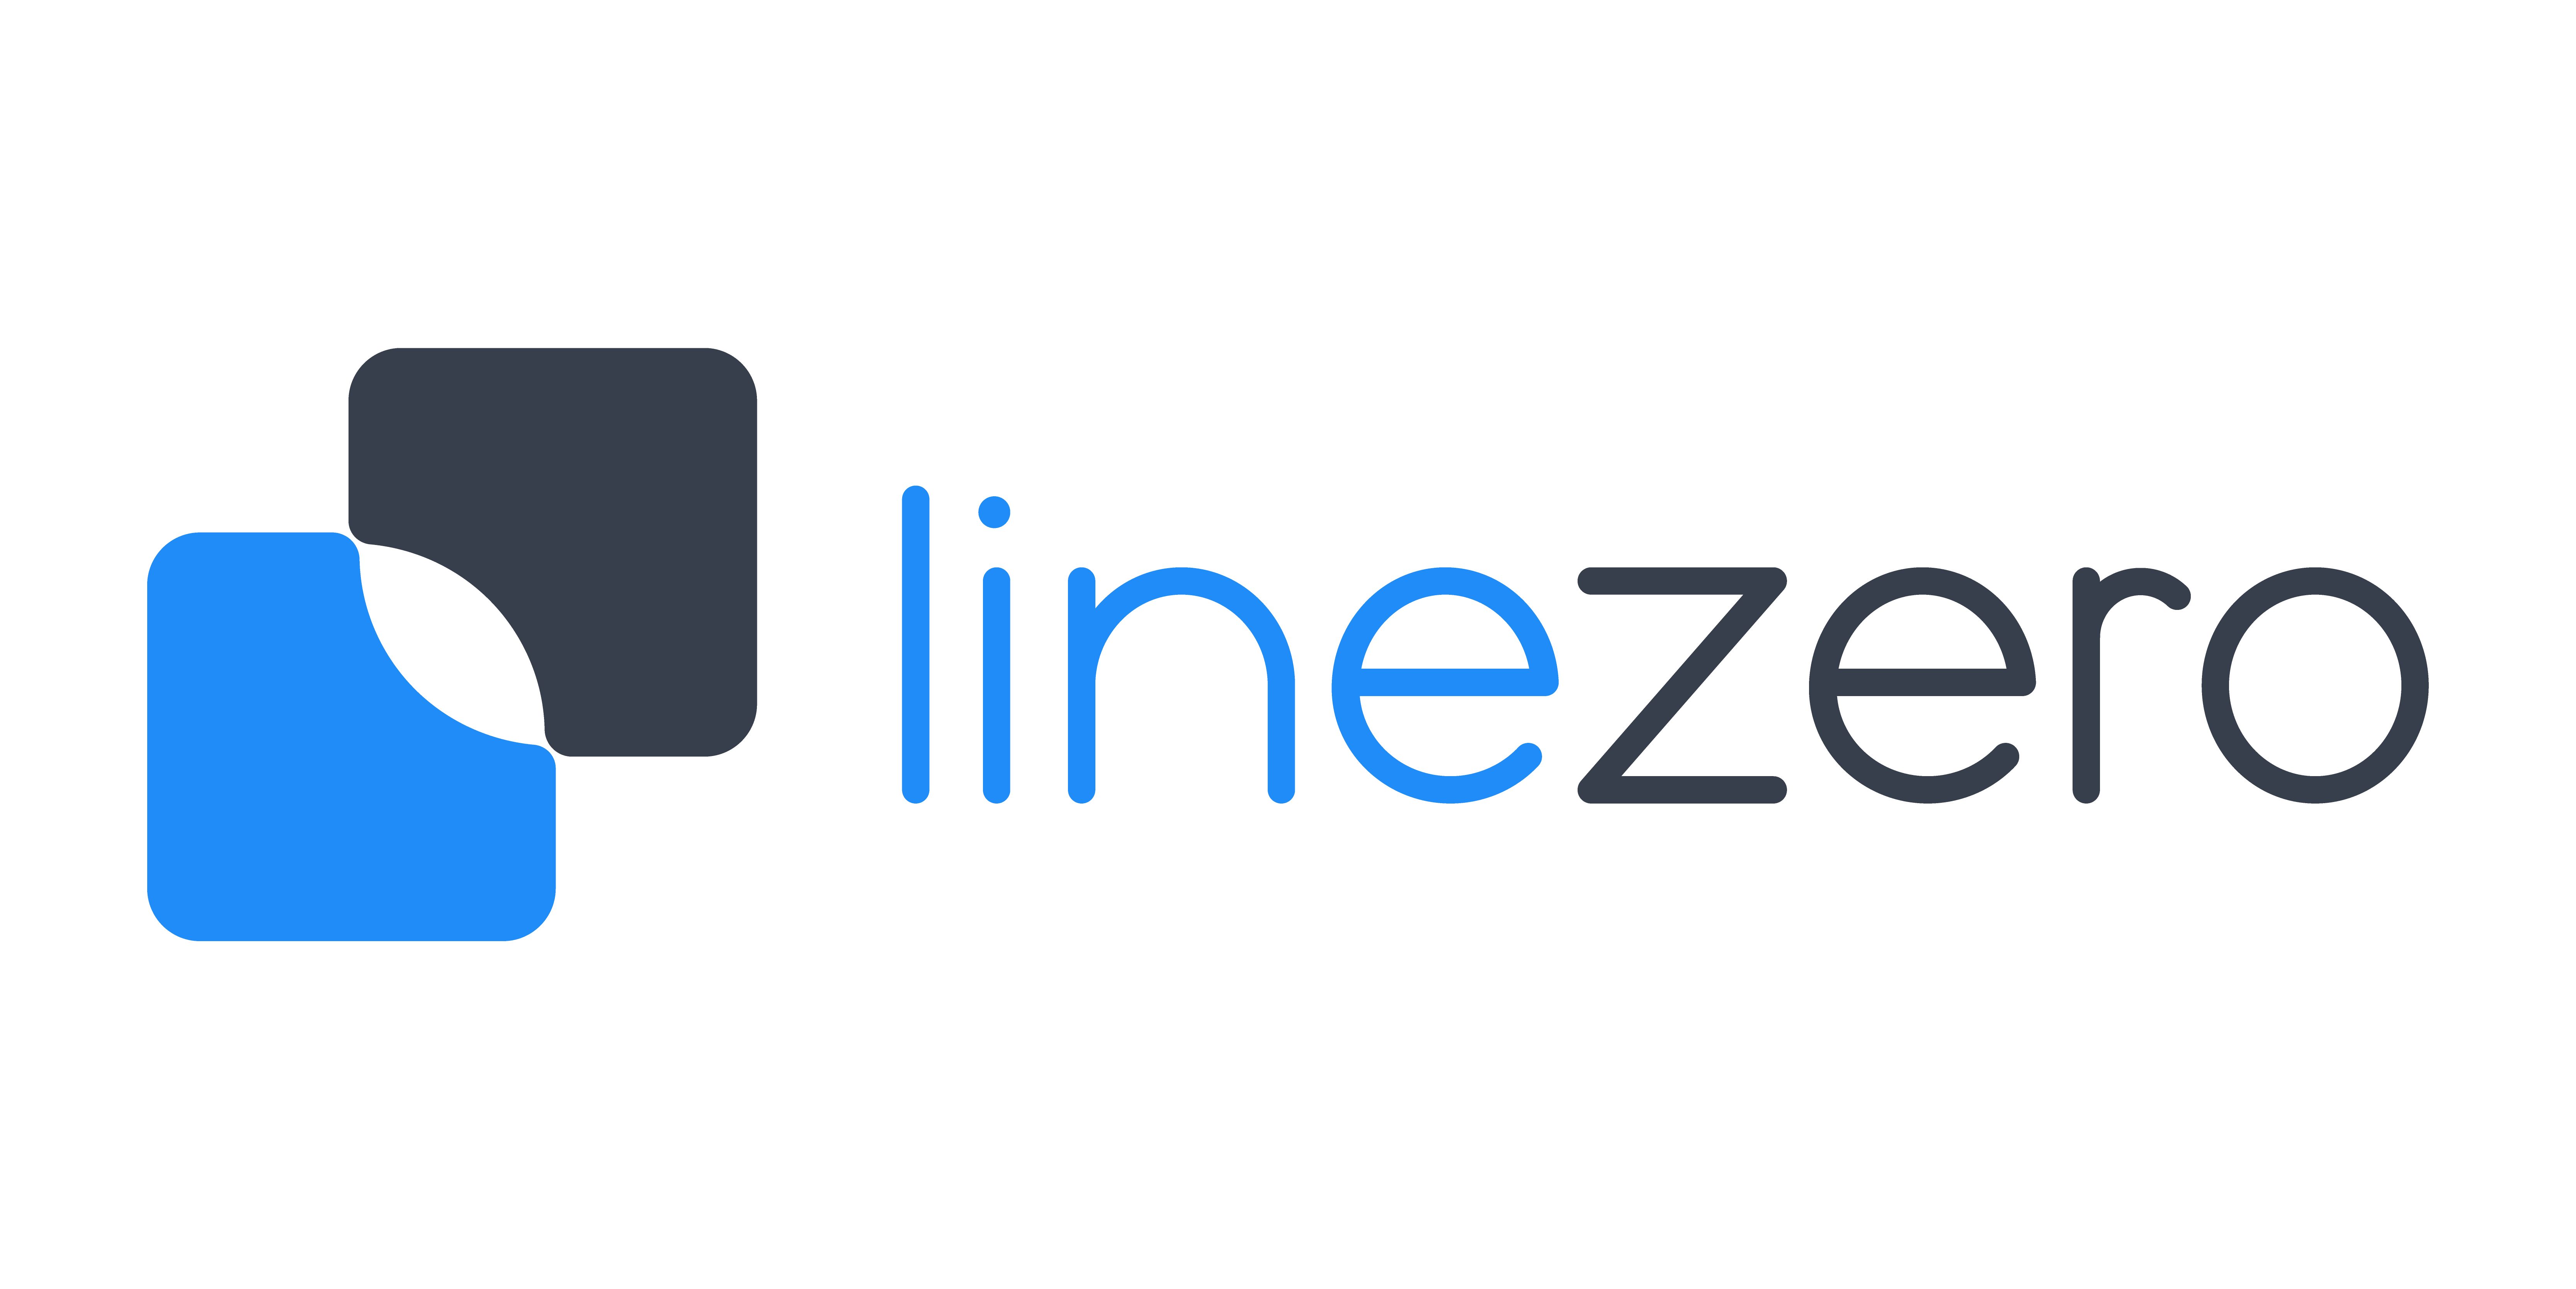 LineZero to Participate in L&D Leaders Event Series and Host Exclusive Mixed Reality Event with Meta in New York City